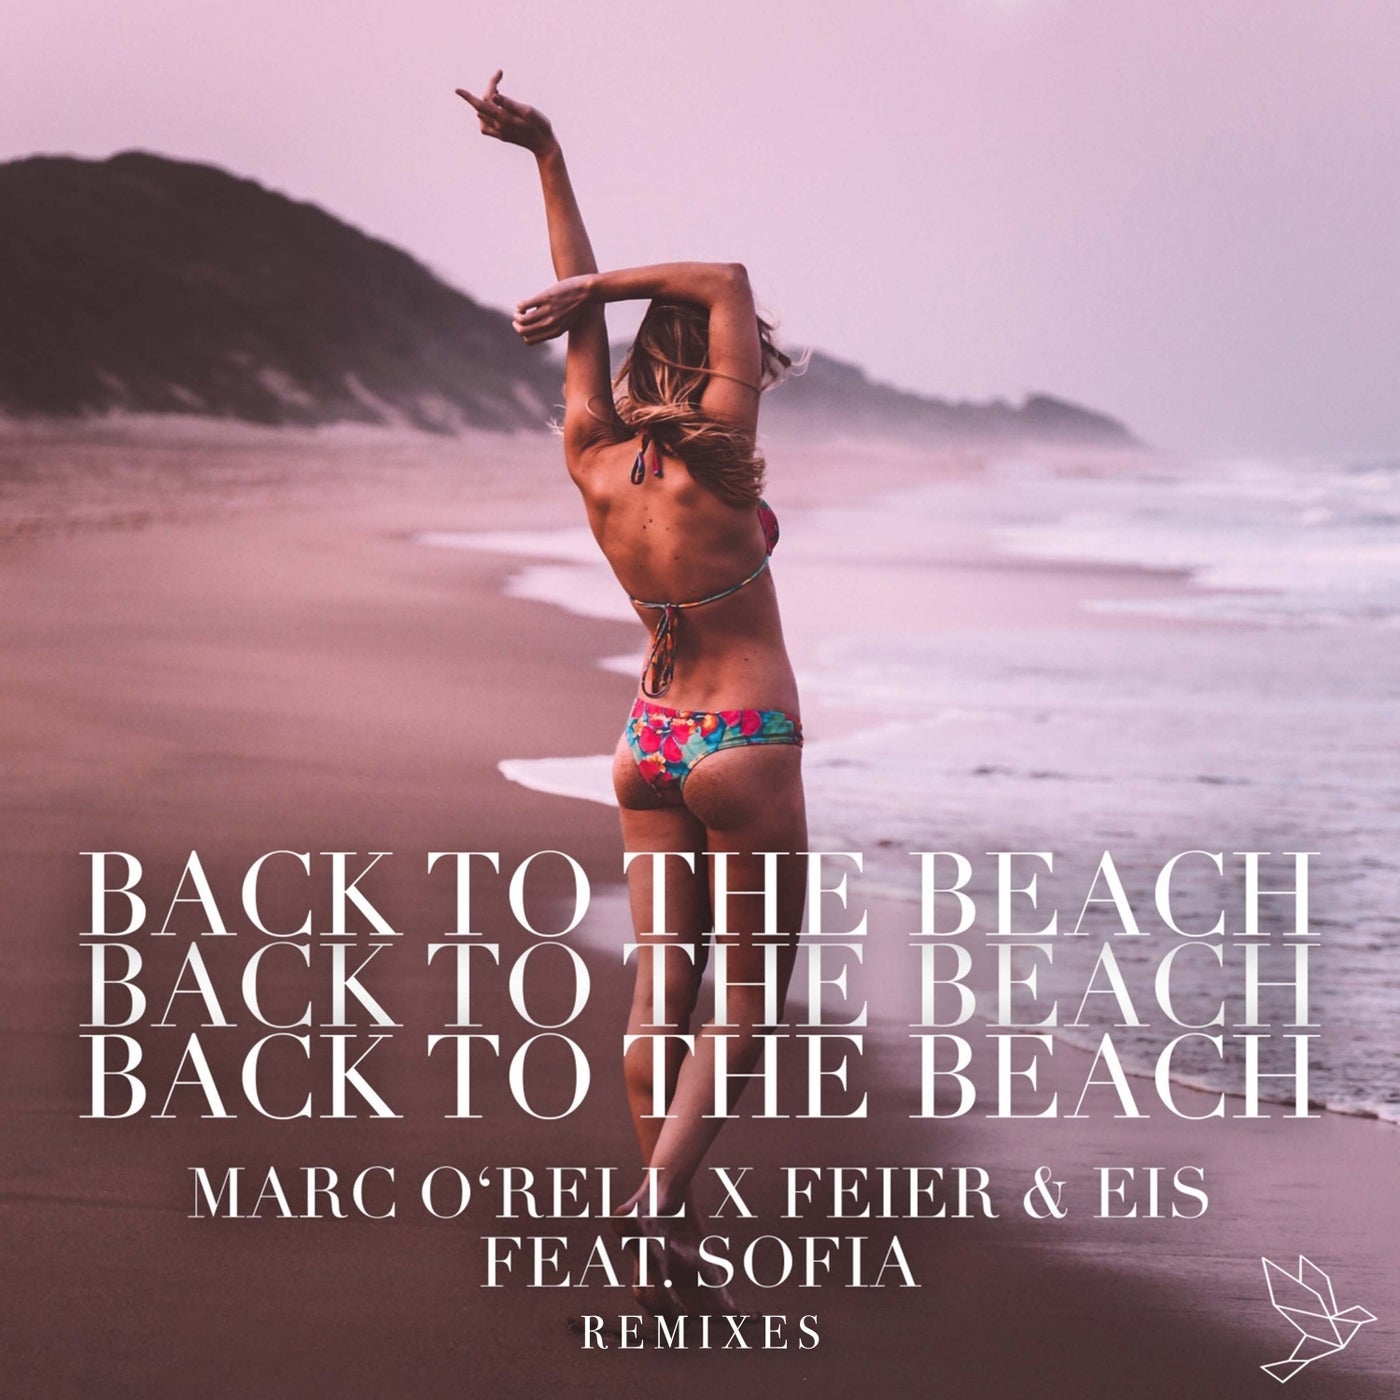 Back to the Beach (Remixes)